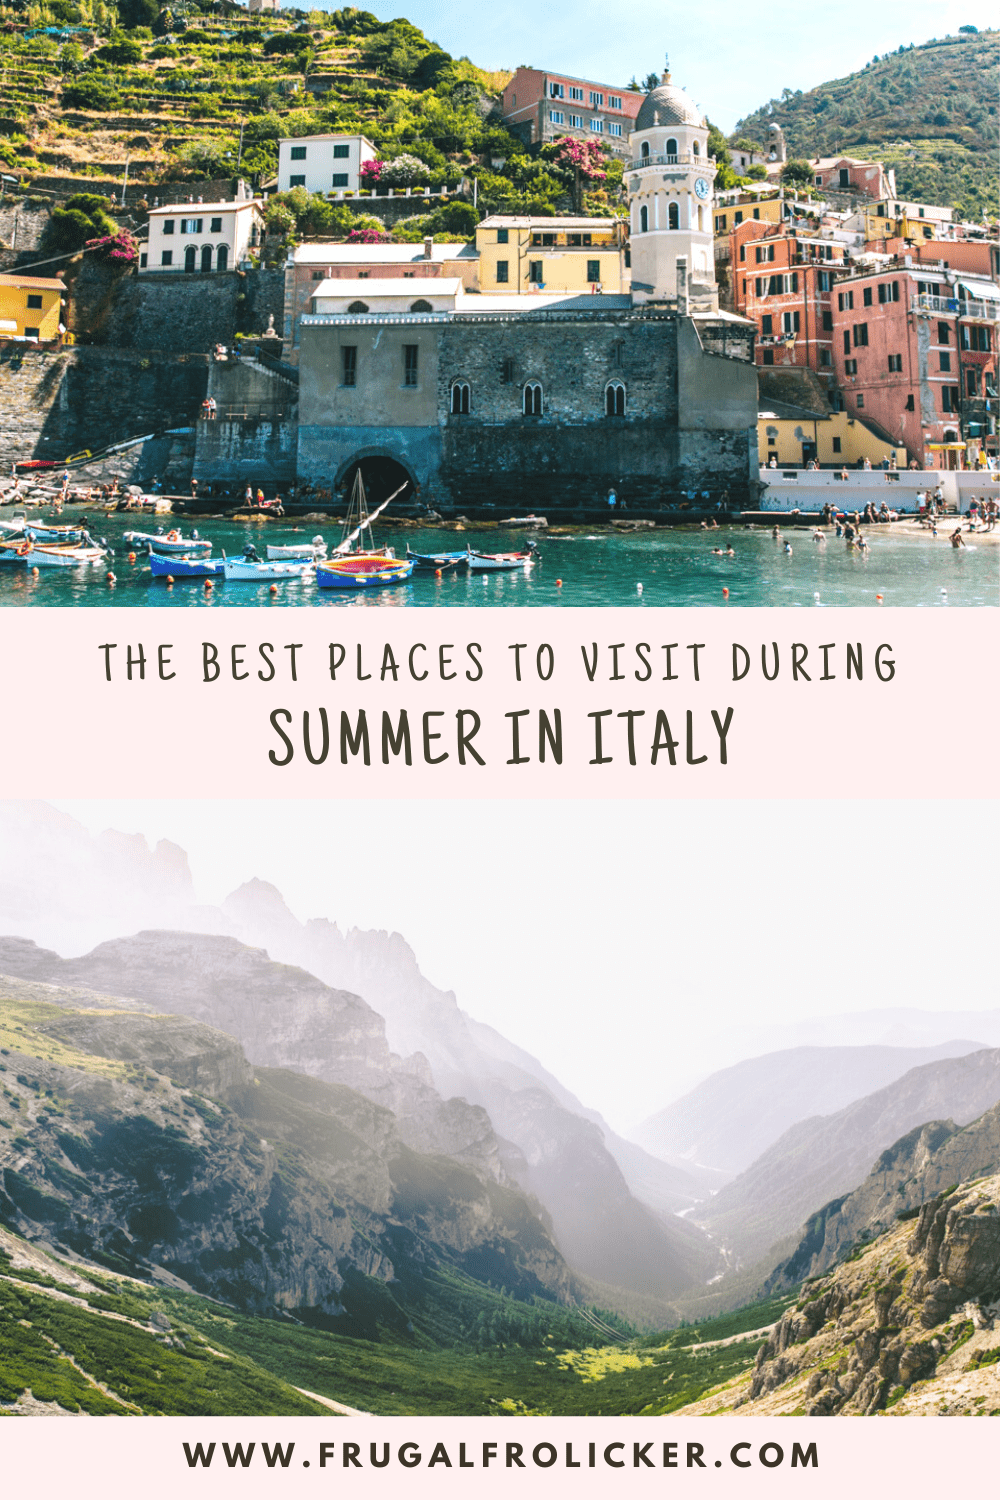 Summer in Italy: where to go for a summer holiday in Italy